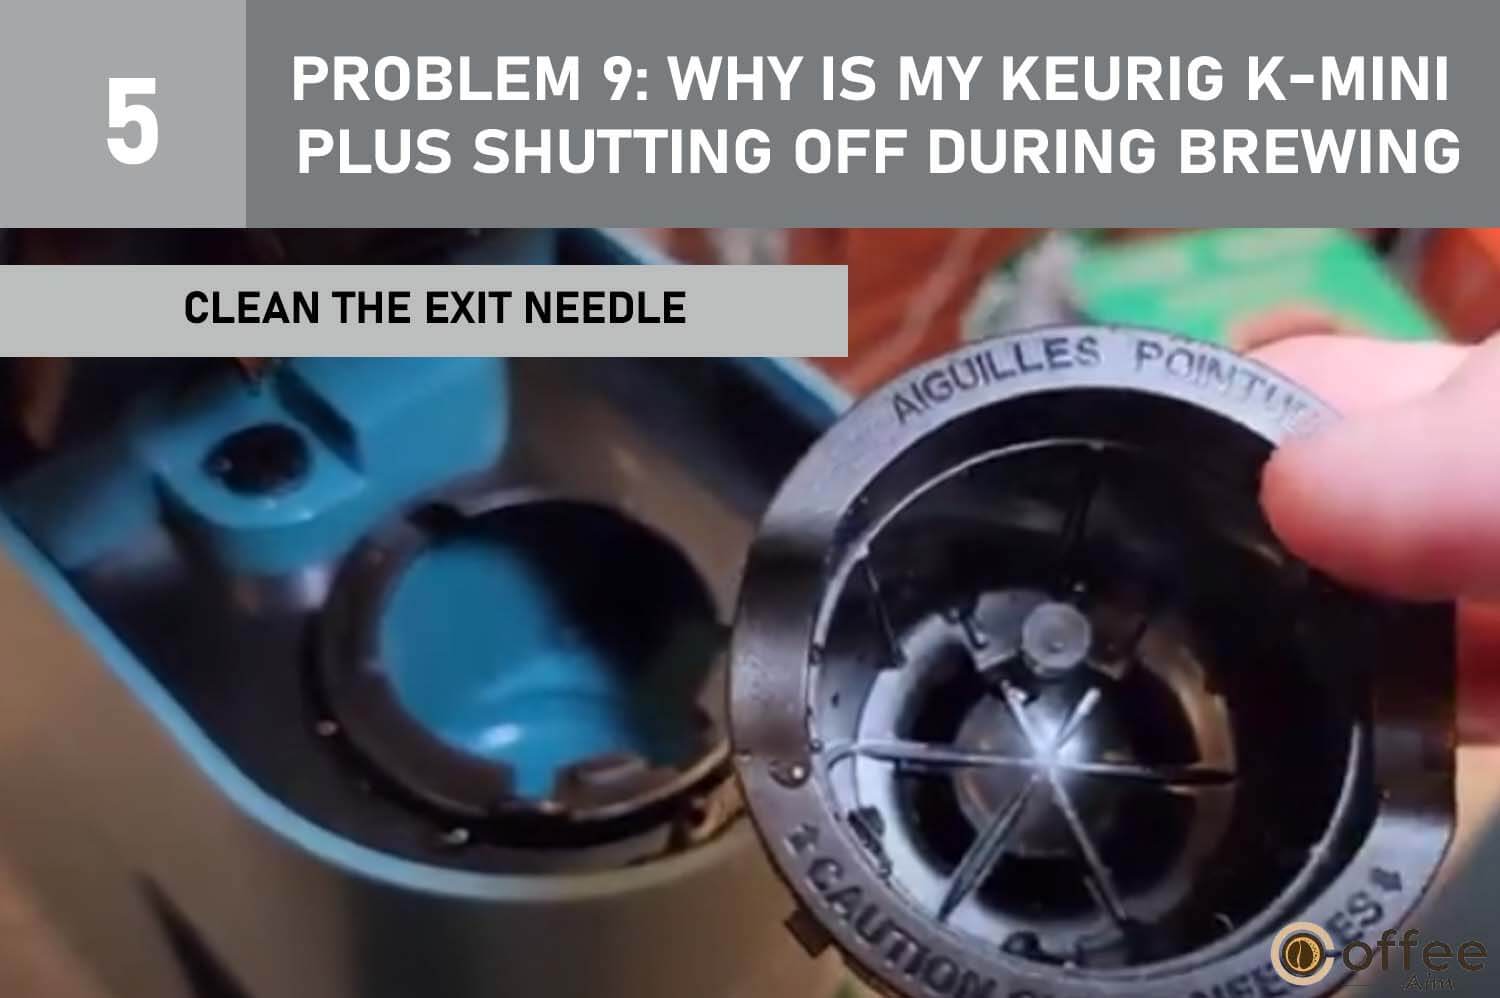 This image provides instructions on how to "Clean the Exit Needle" as part of addressing Problem 9: "Why Is My Keurig K-Mini Plus Shutting Off During Brewing?" in our comprehensive article on "Keurig K-Mini Plus Problems."





